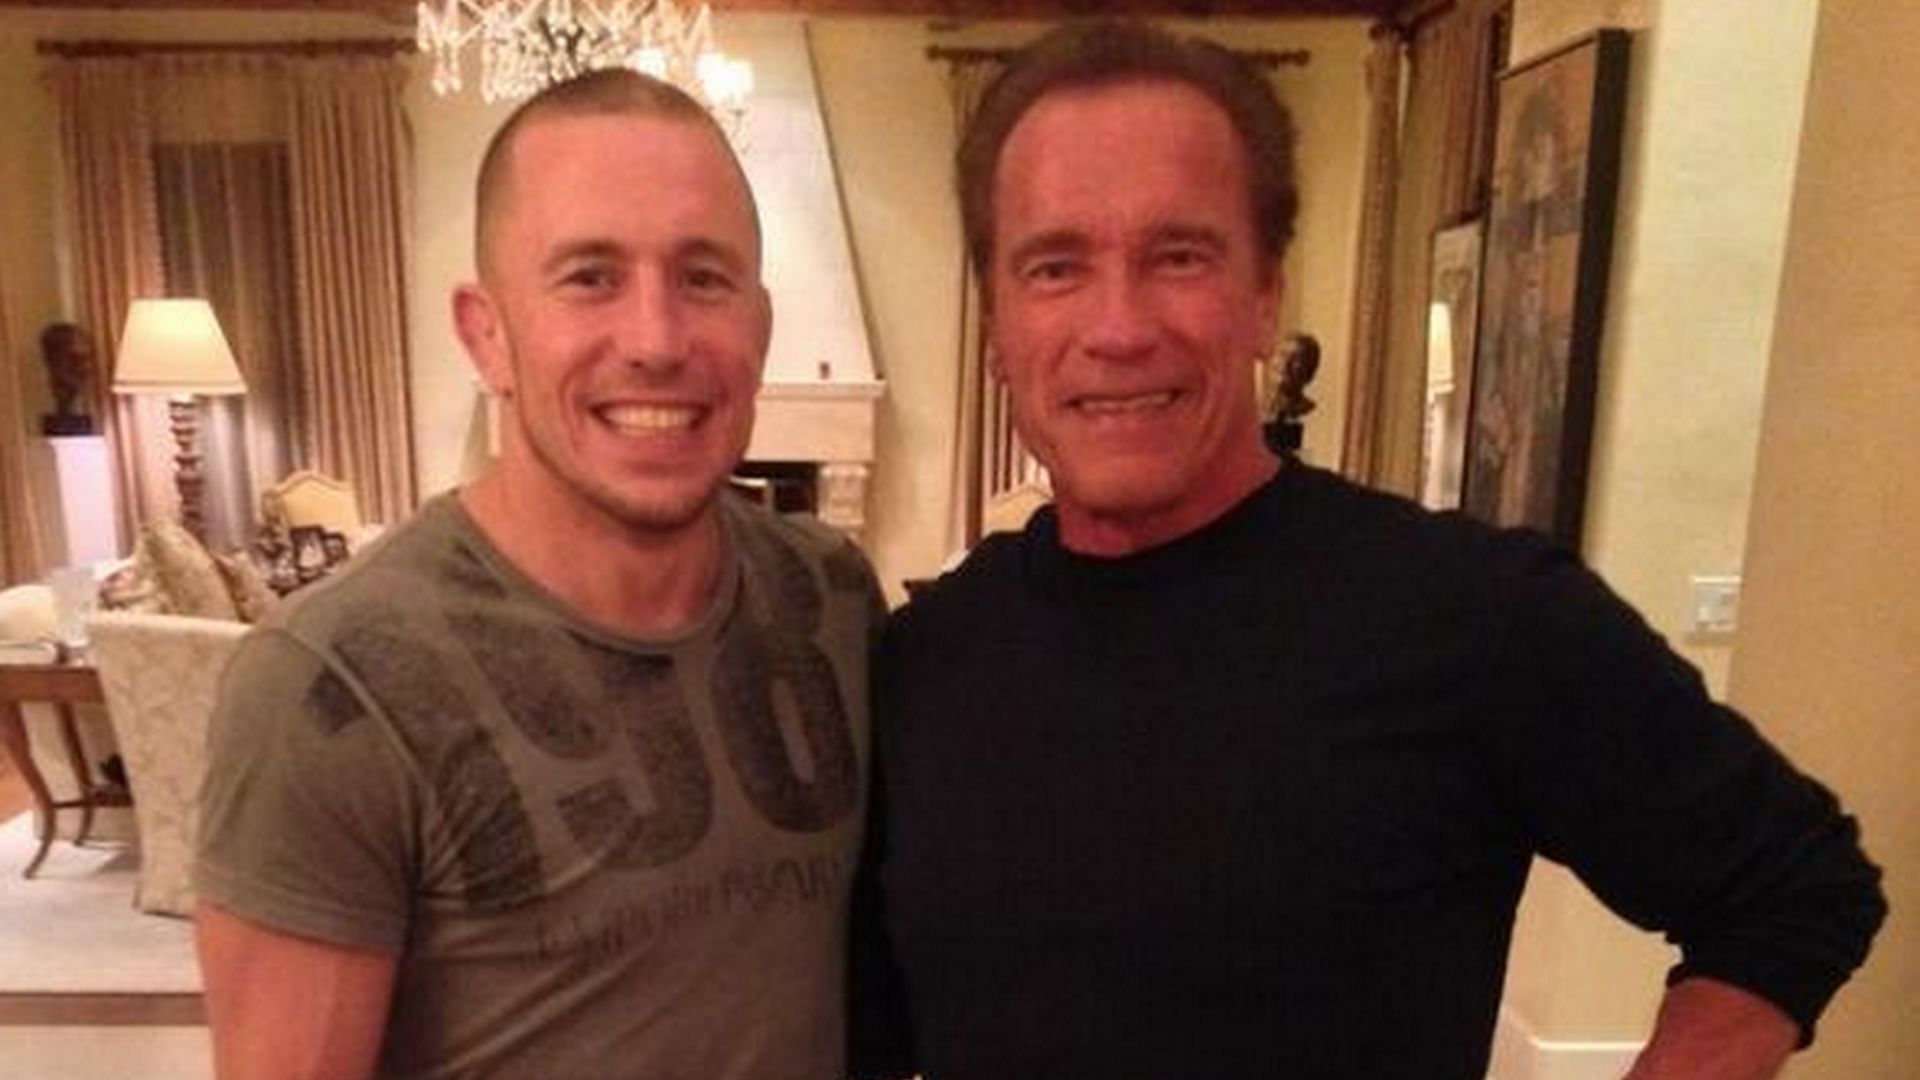 George St-Pierre (L) and Arnold Schwarzenegger (R)